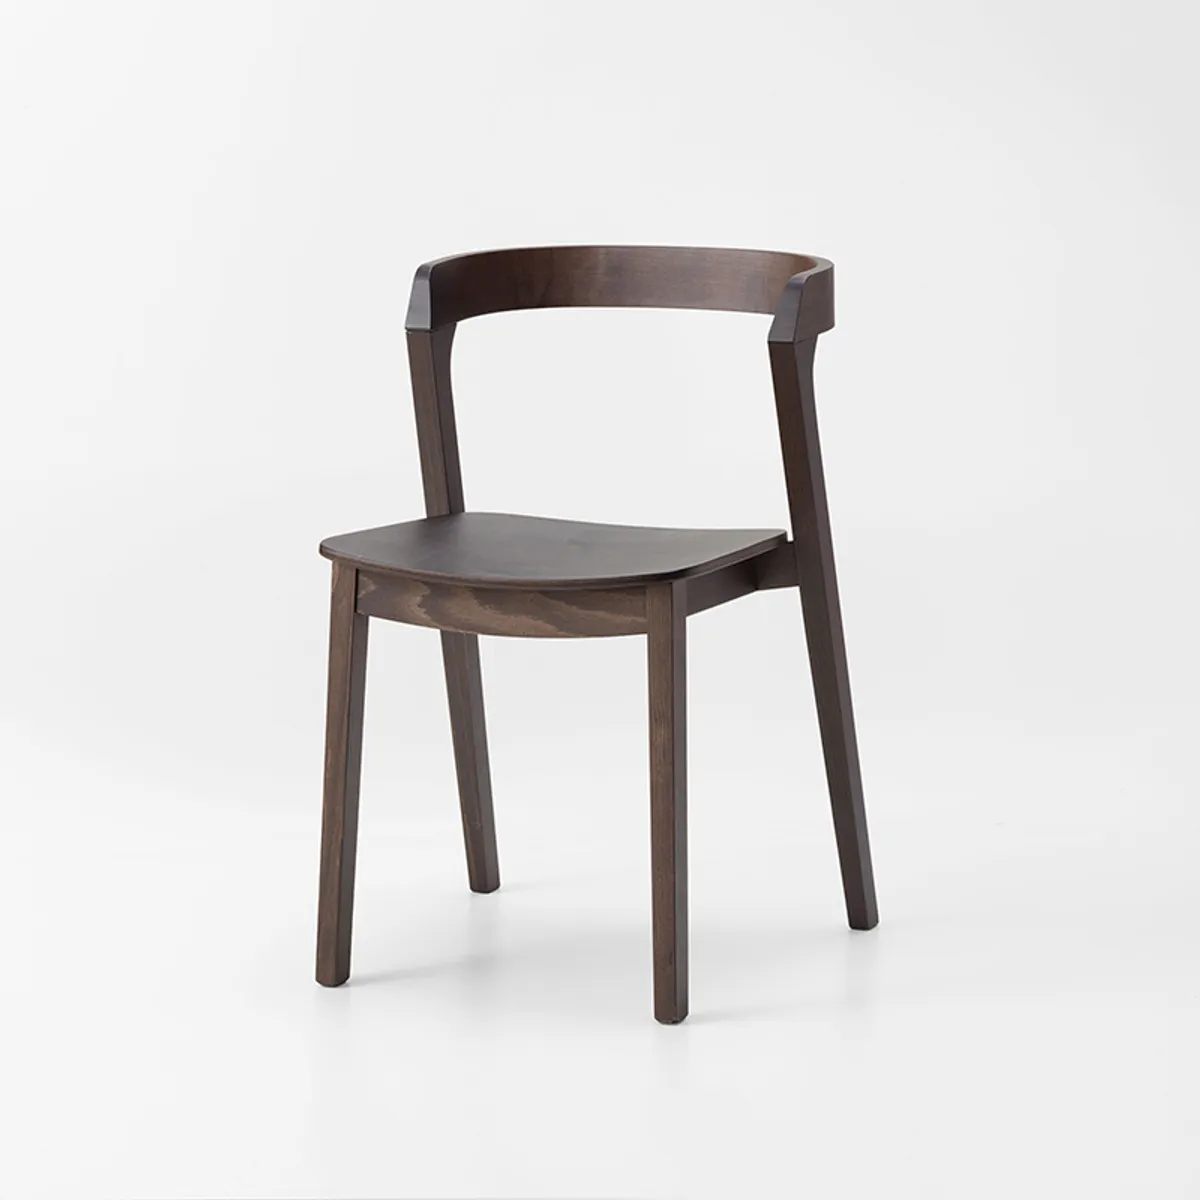 Crest Chair Curved Scandi Furniture Inside Out Contracts